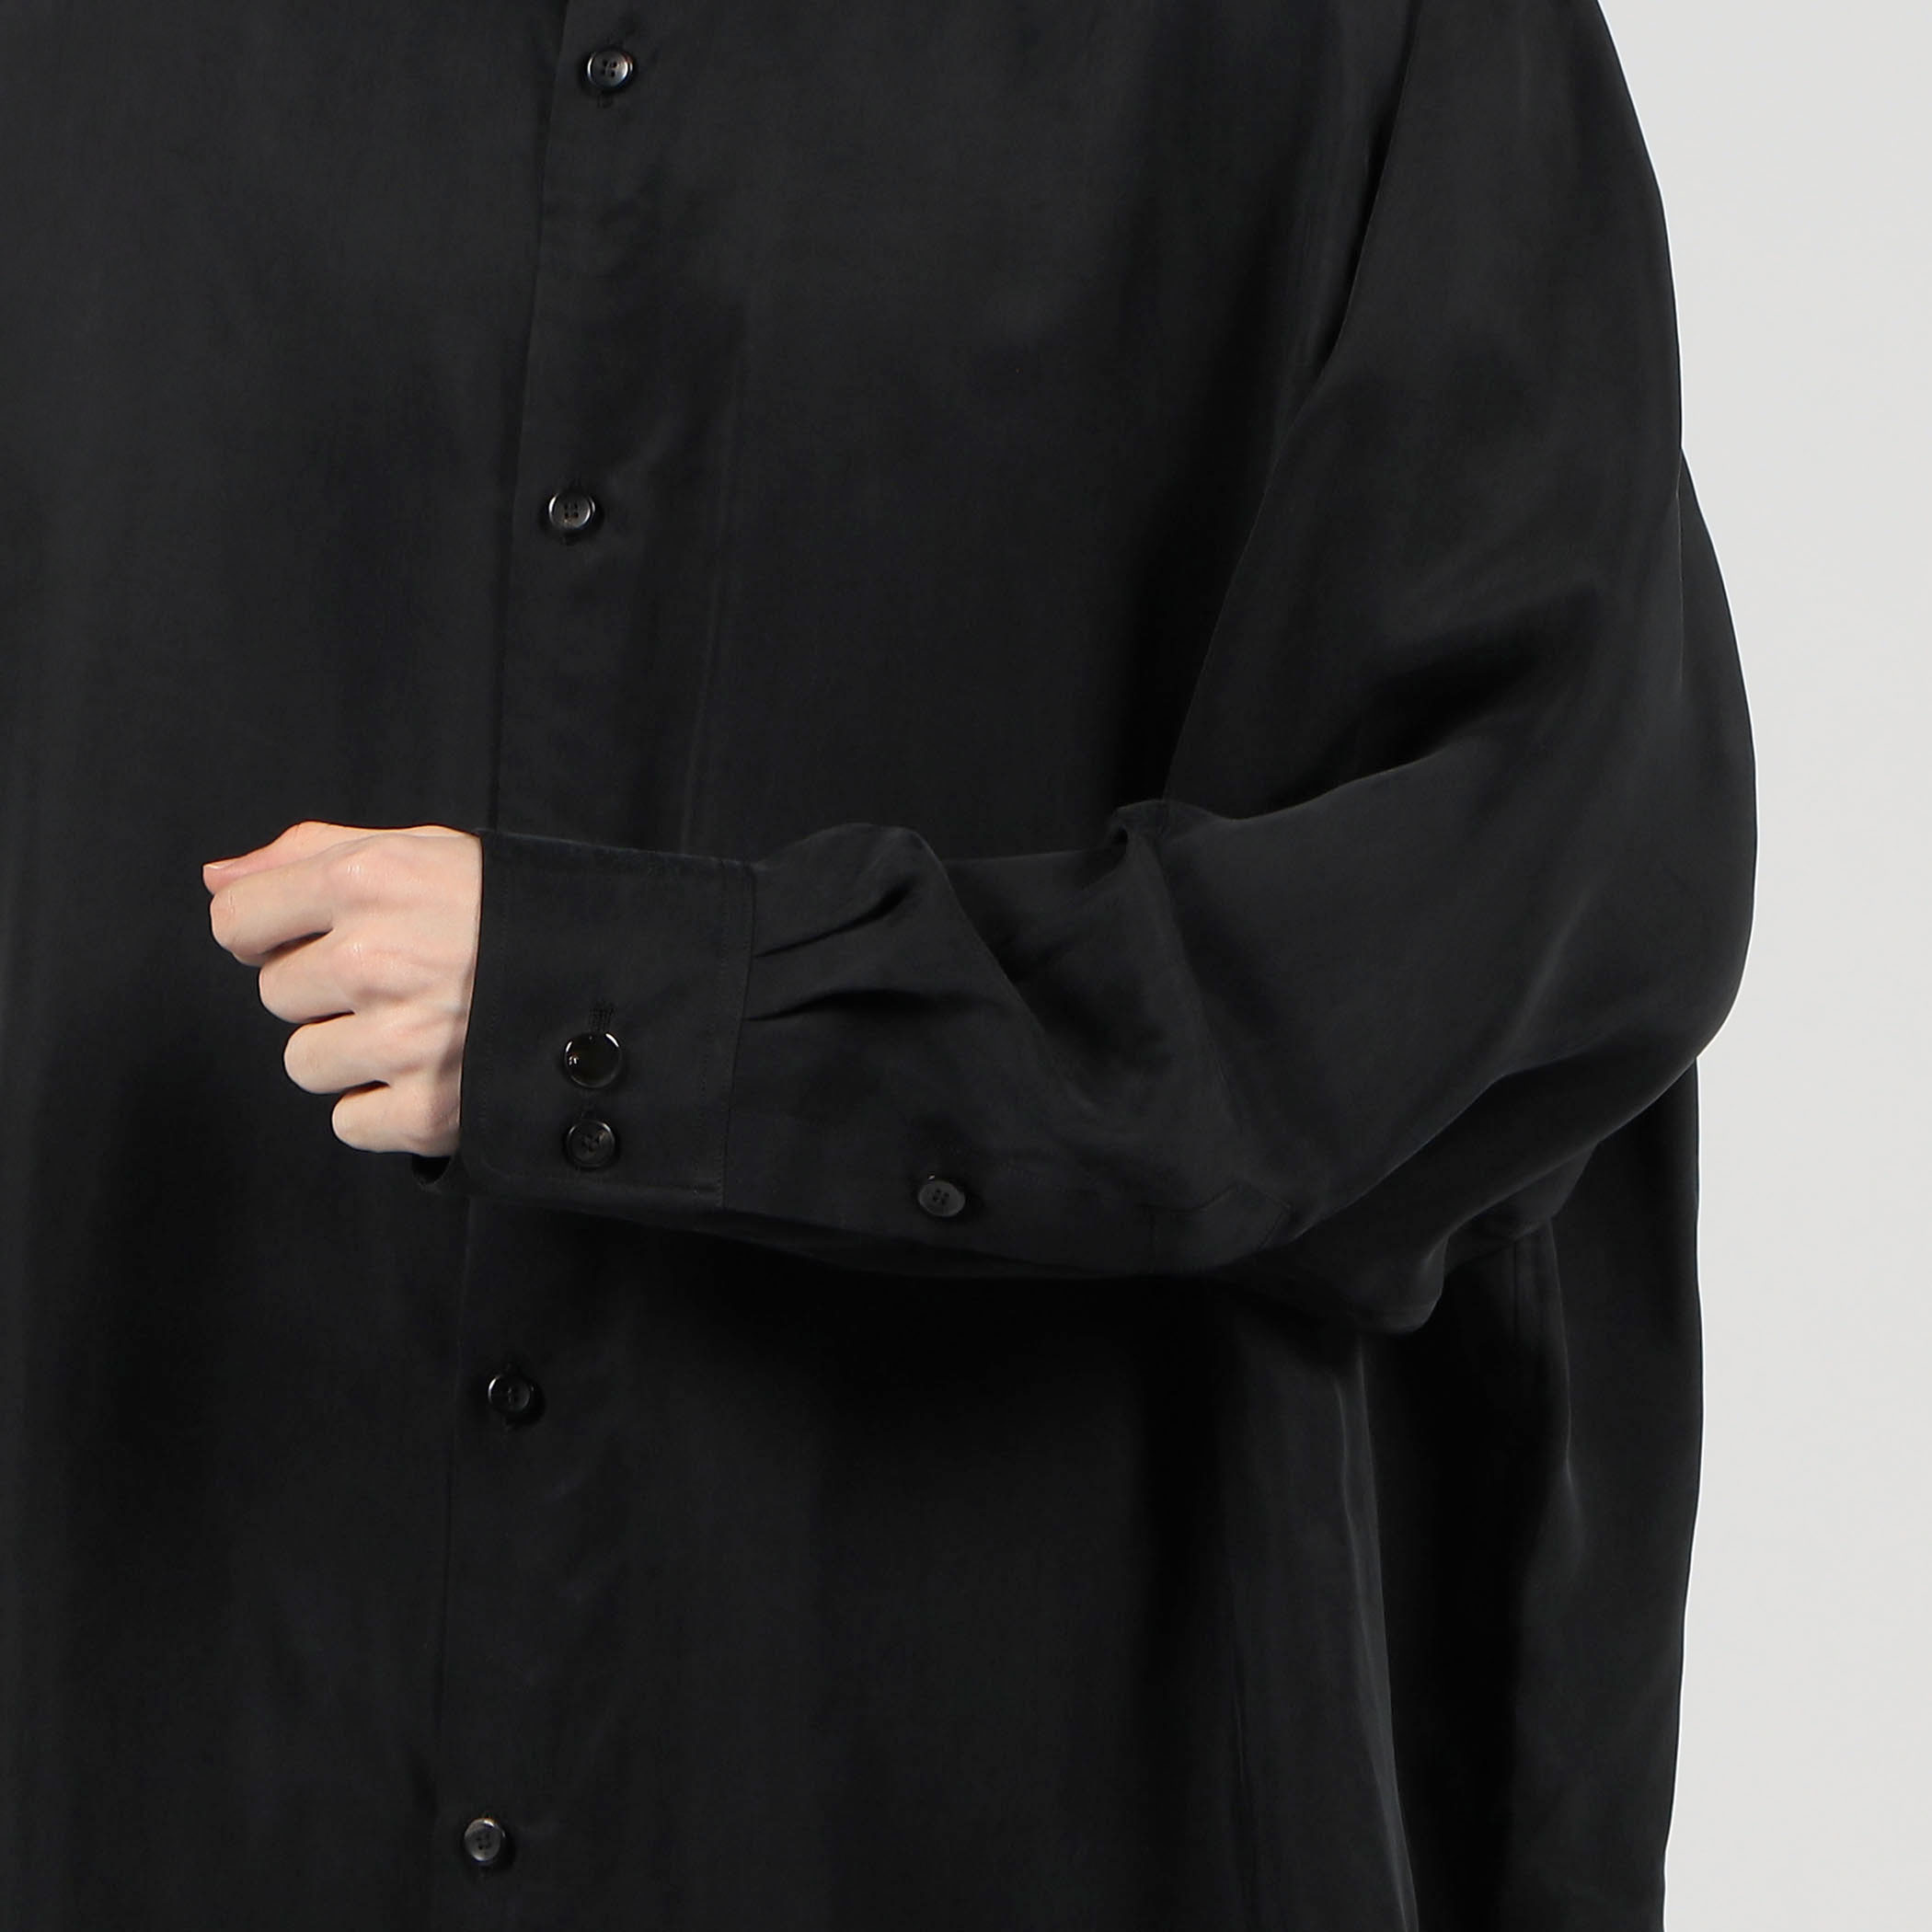 th products Oversized Shirt シャツ